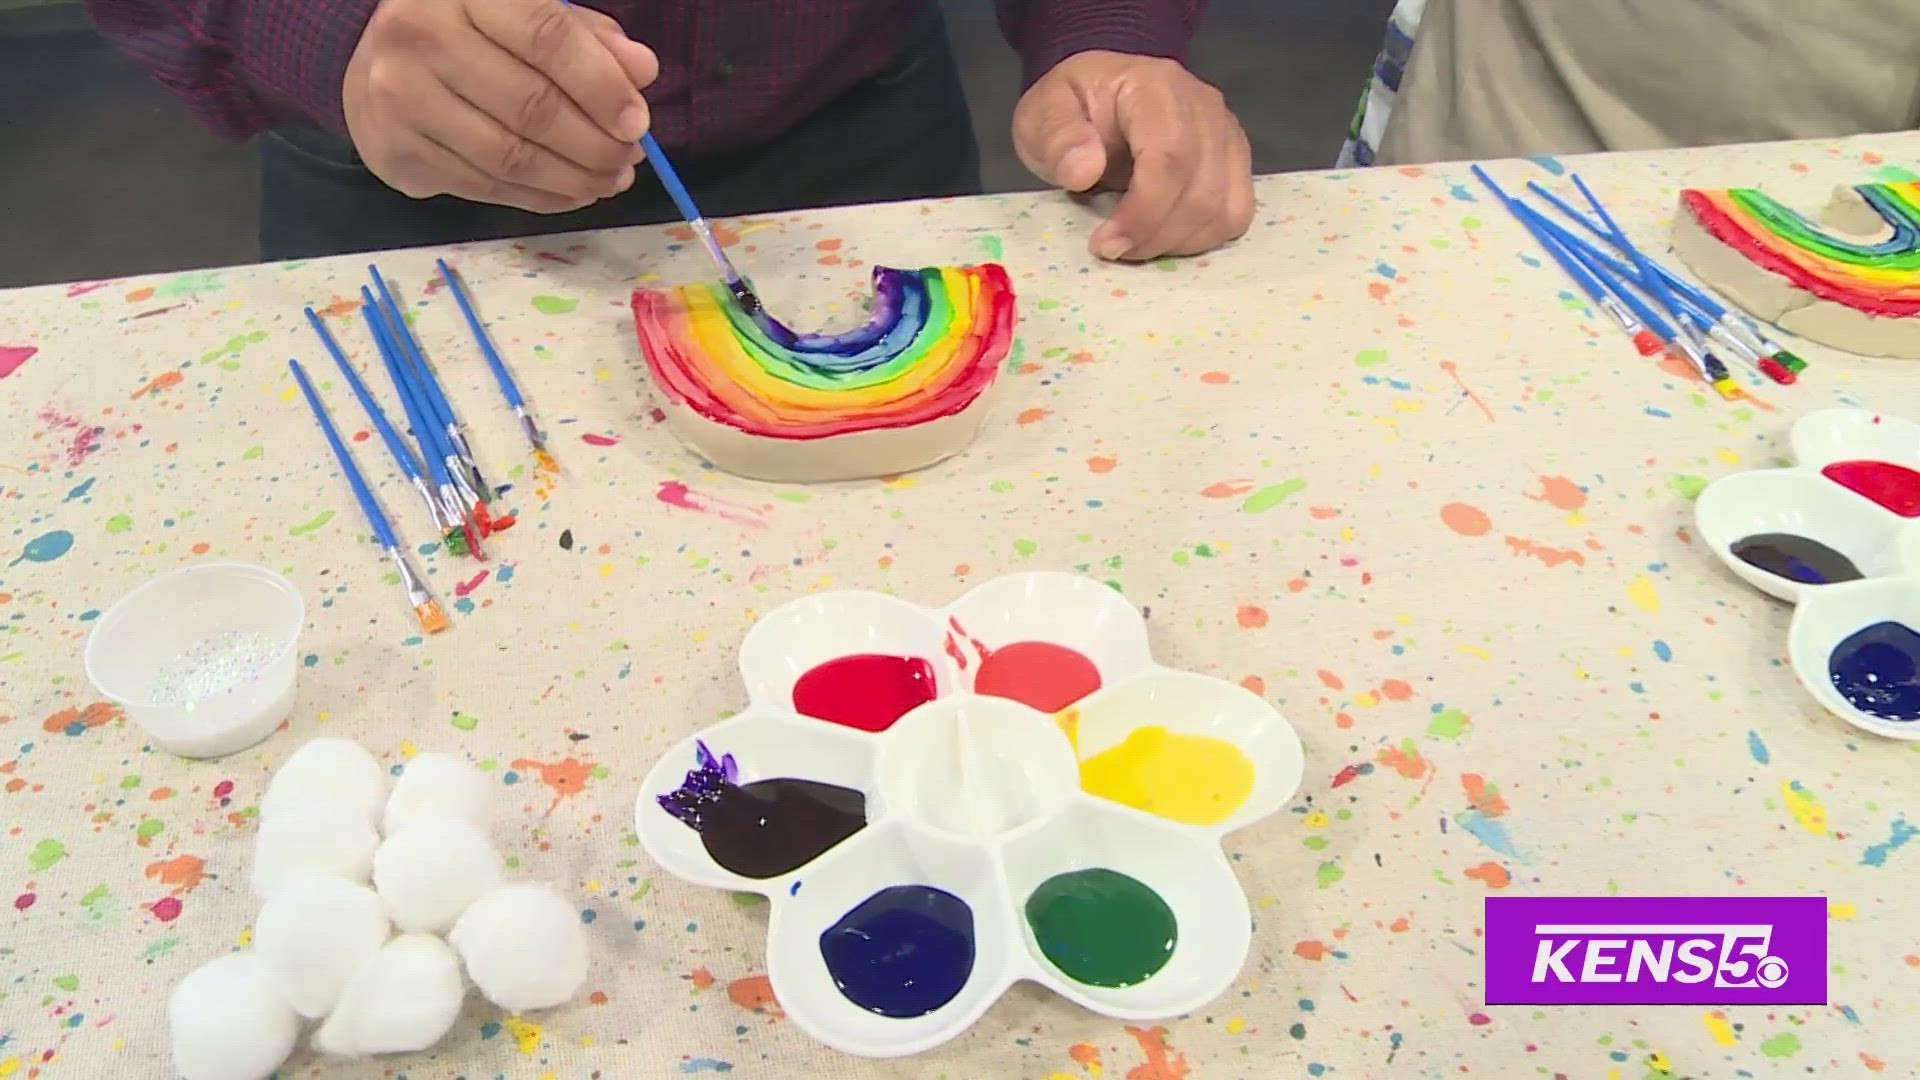 Shannon Schumacher with Kidcreate Studio shows Paul how to make a clay rainbow you can do with your kids.